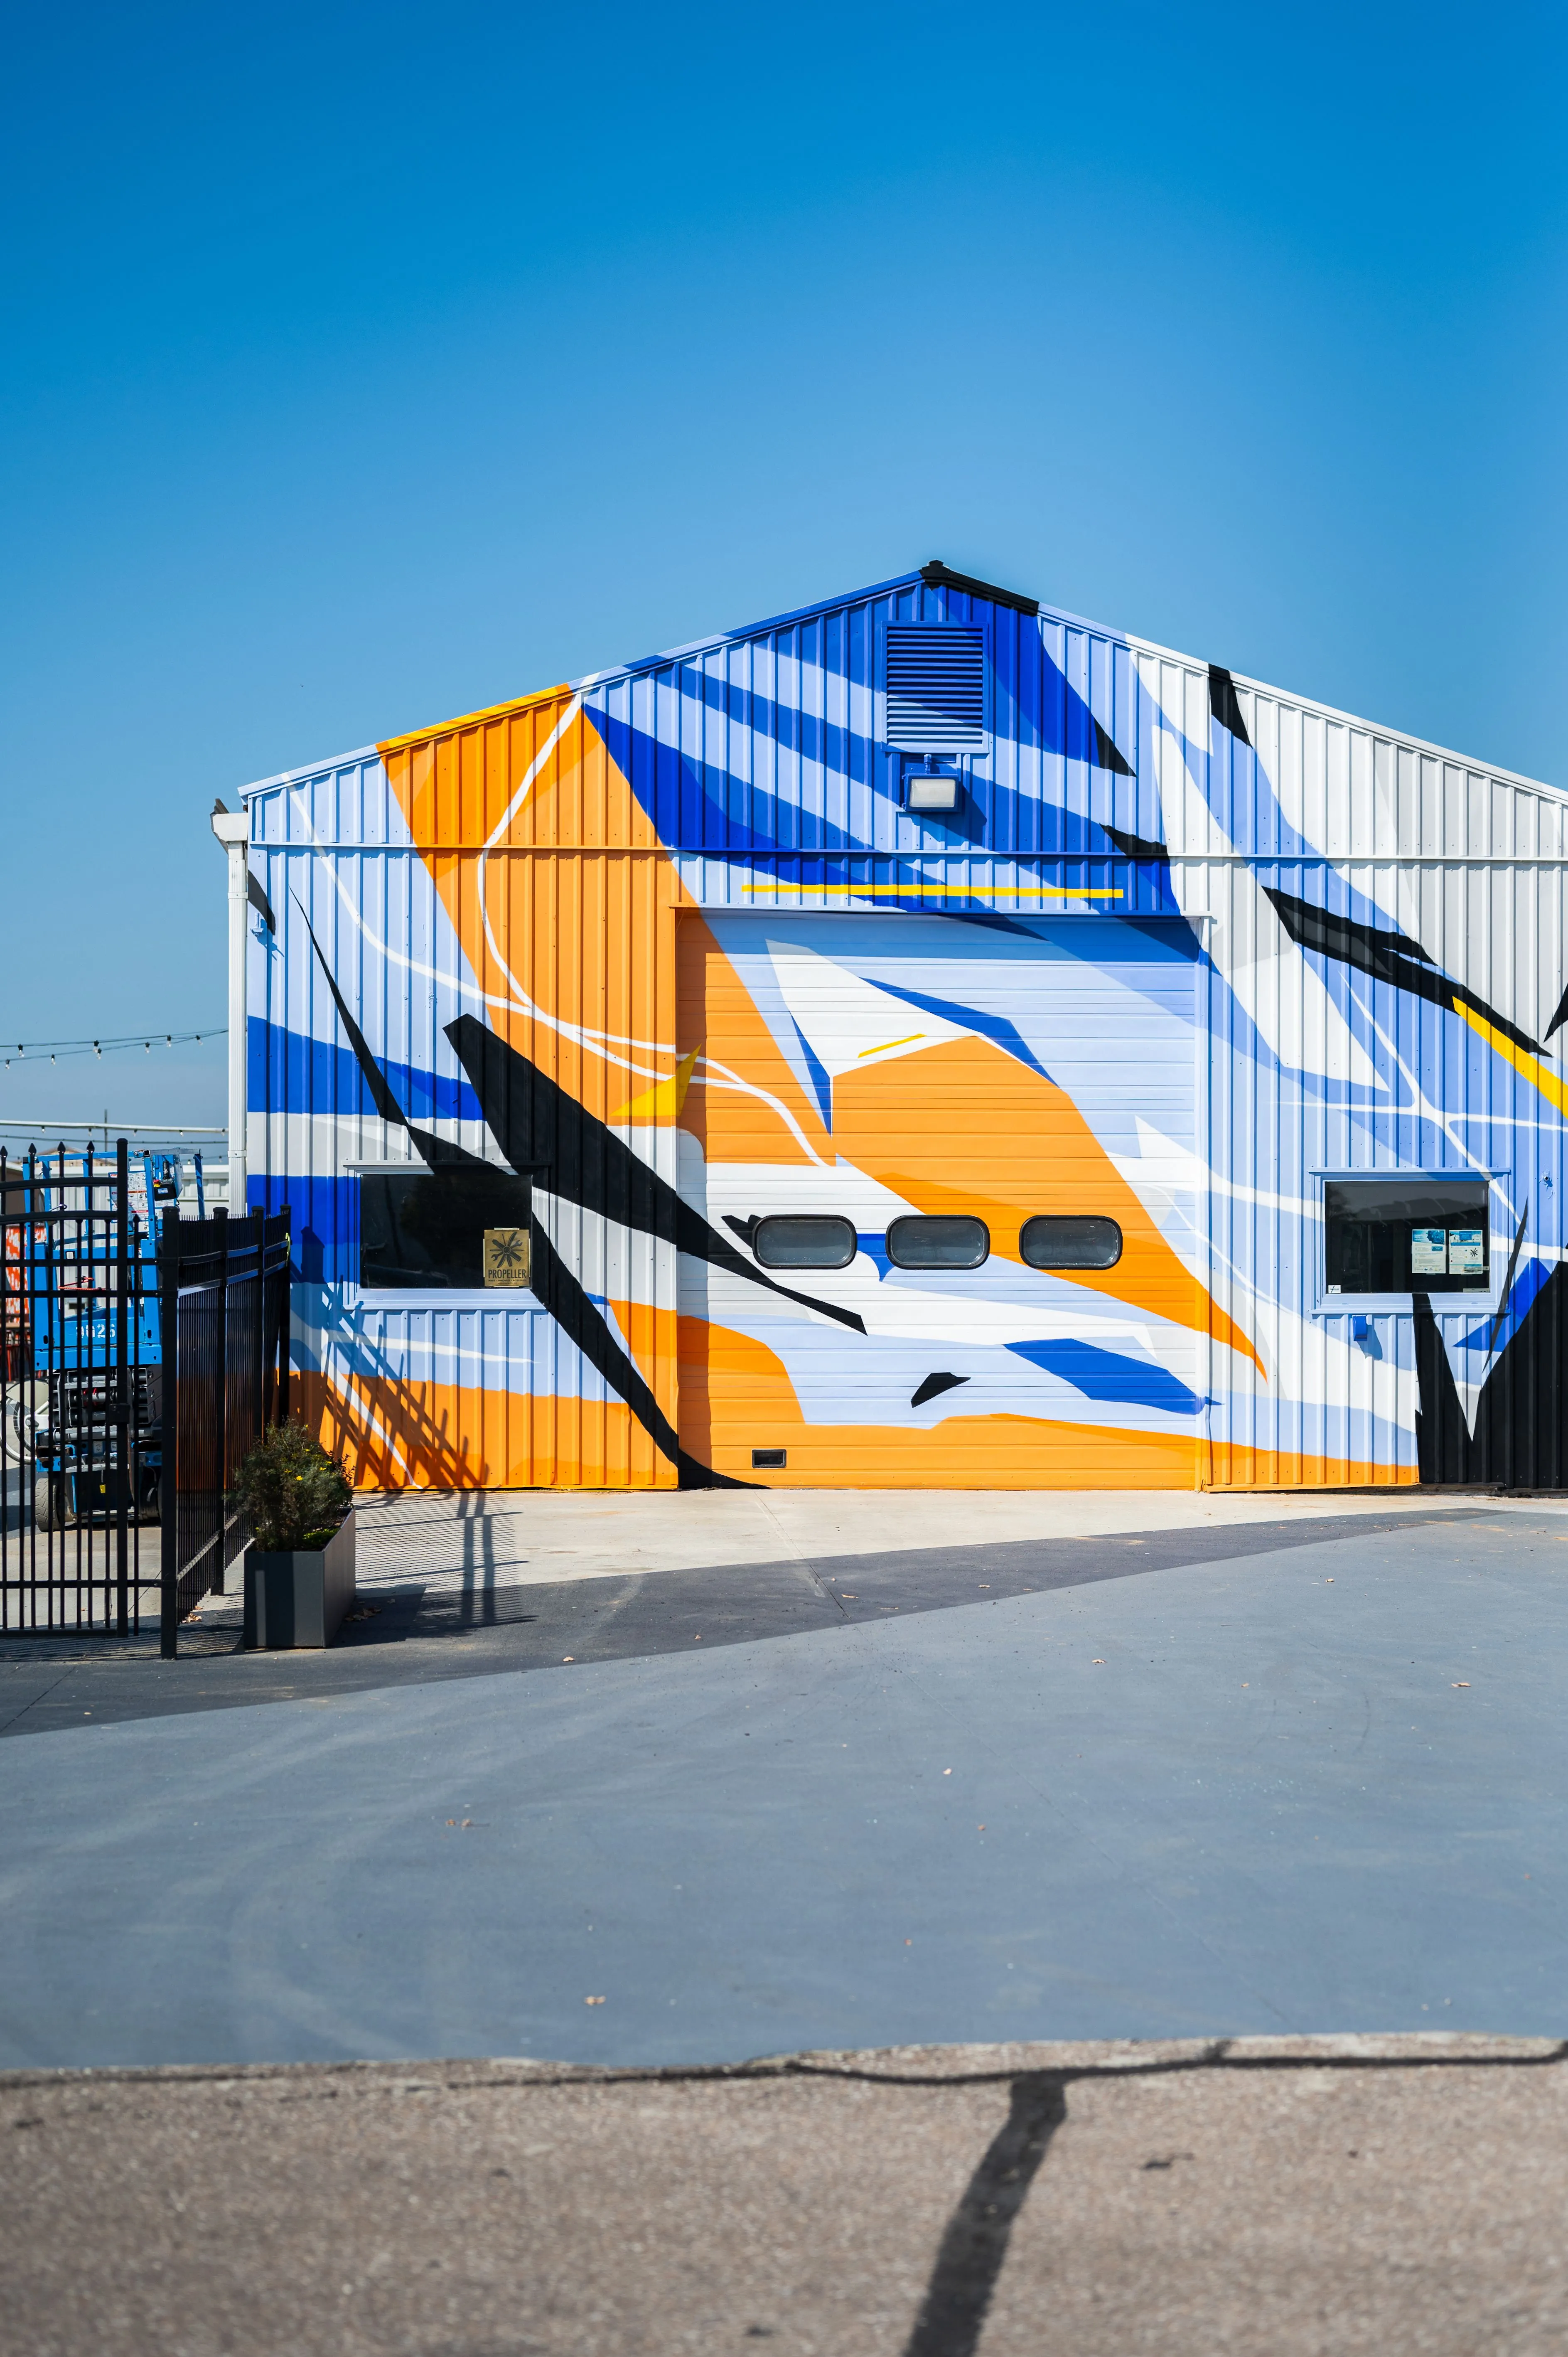 Modern industrial building with a colorful geometric mural on its facade, under a clear blue sky.